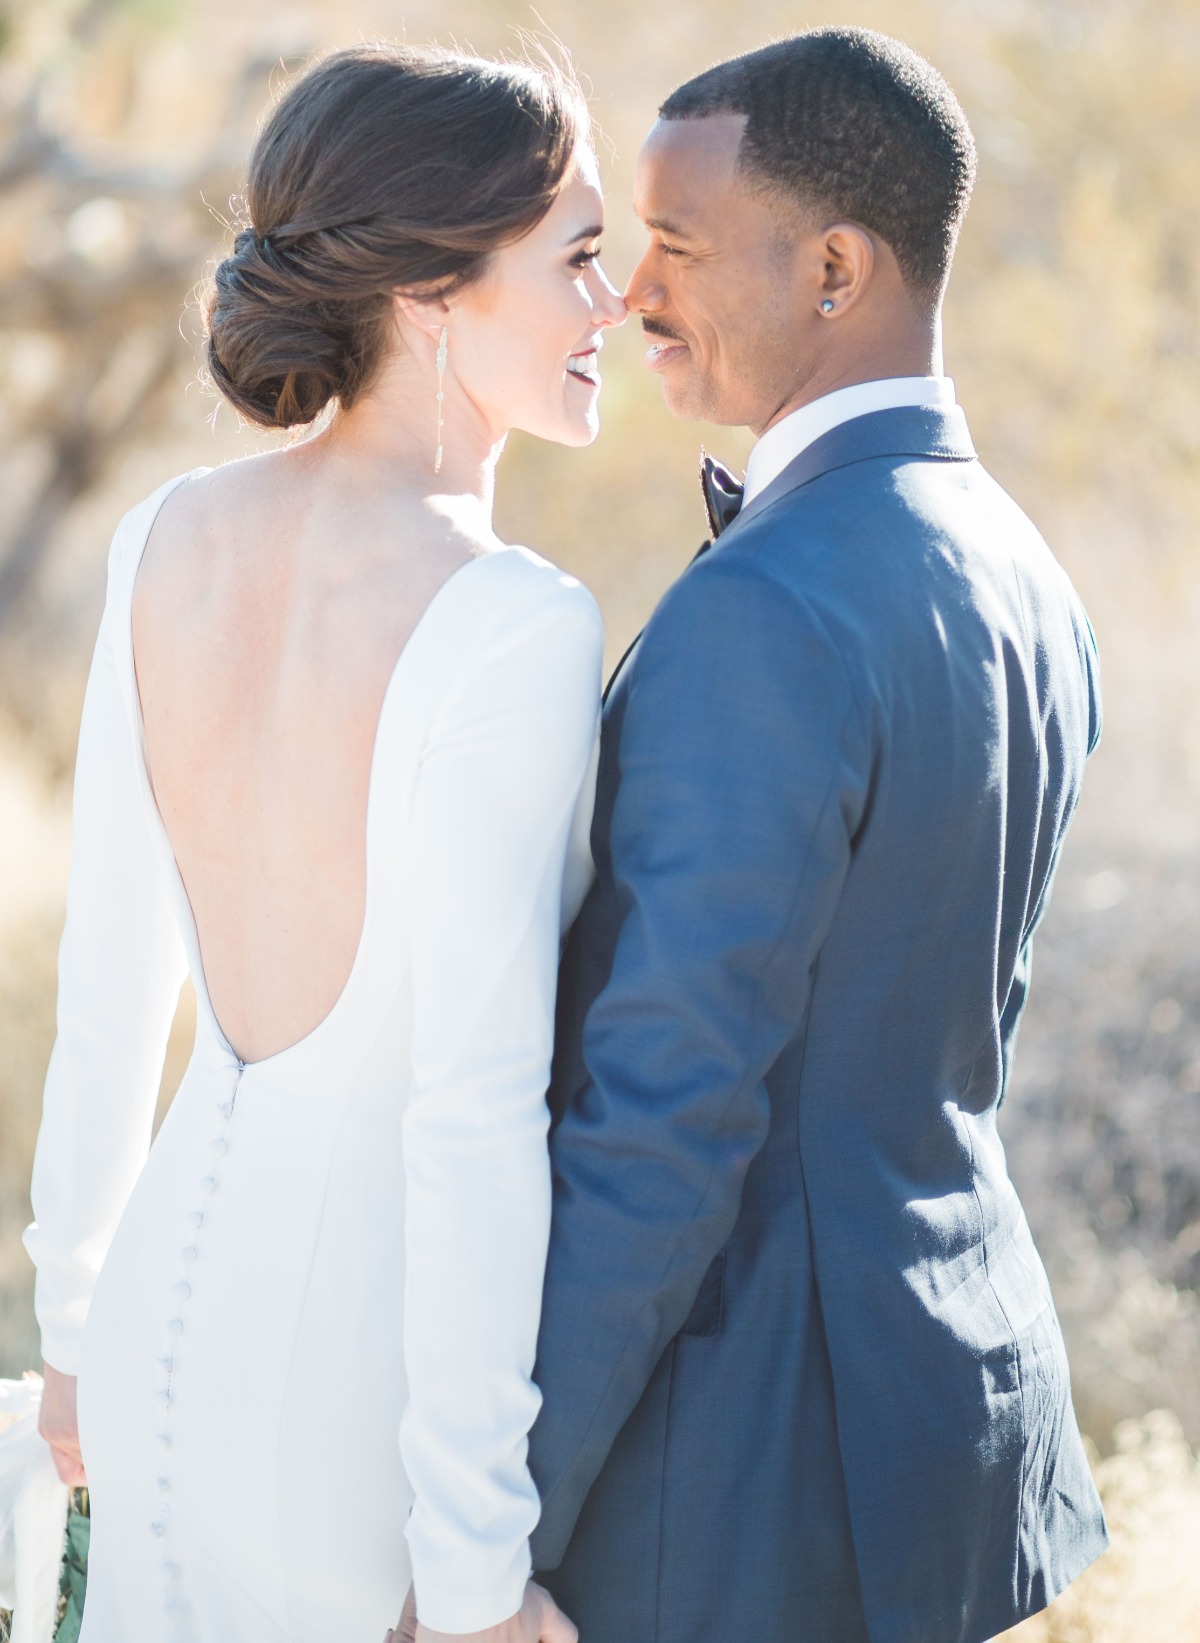 Upscale Wild-Hearted Microwedding in the Las Vegas Desert